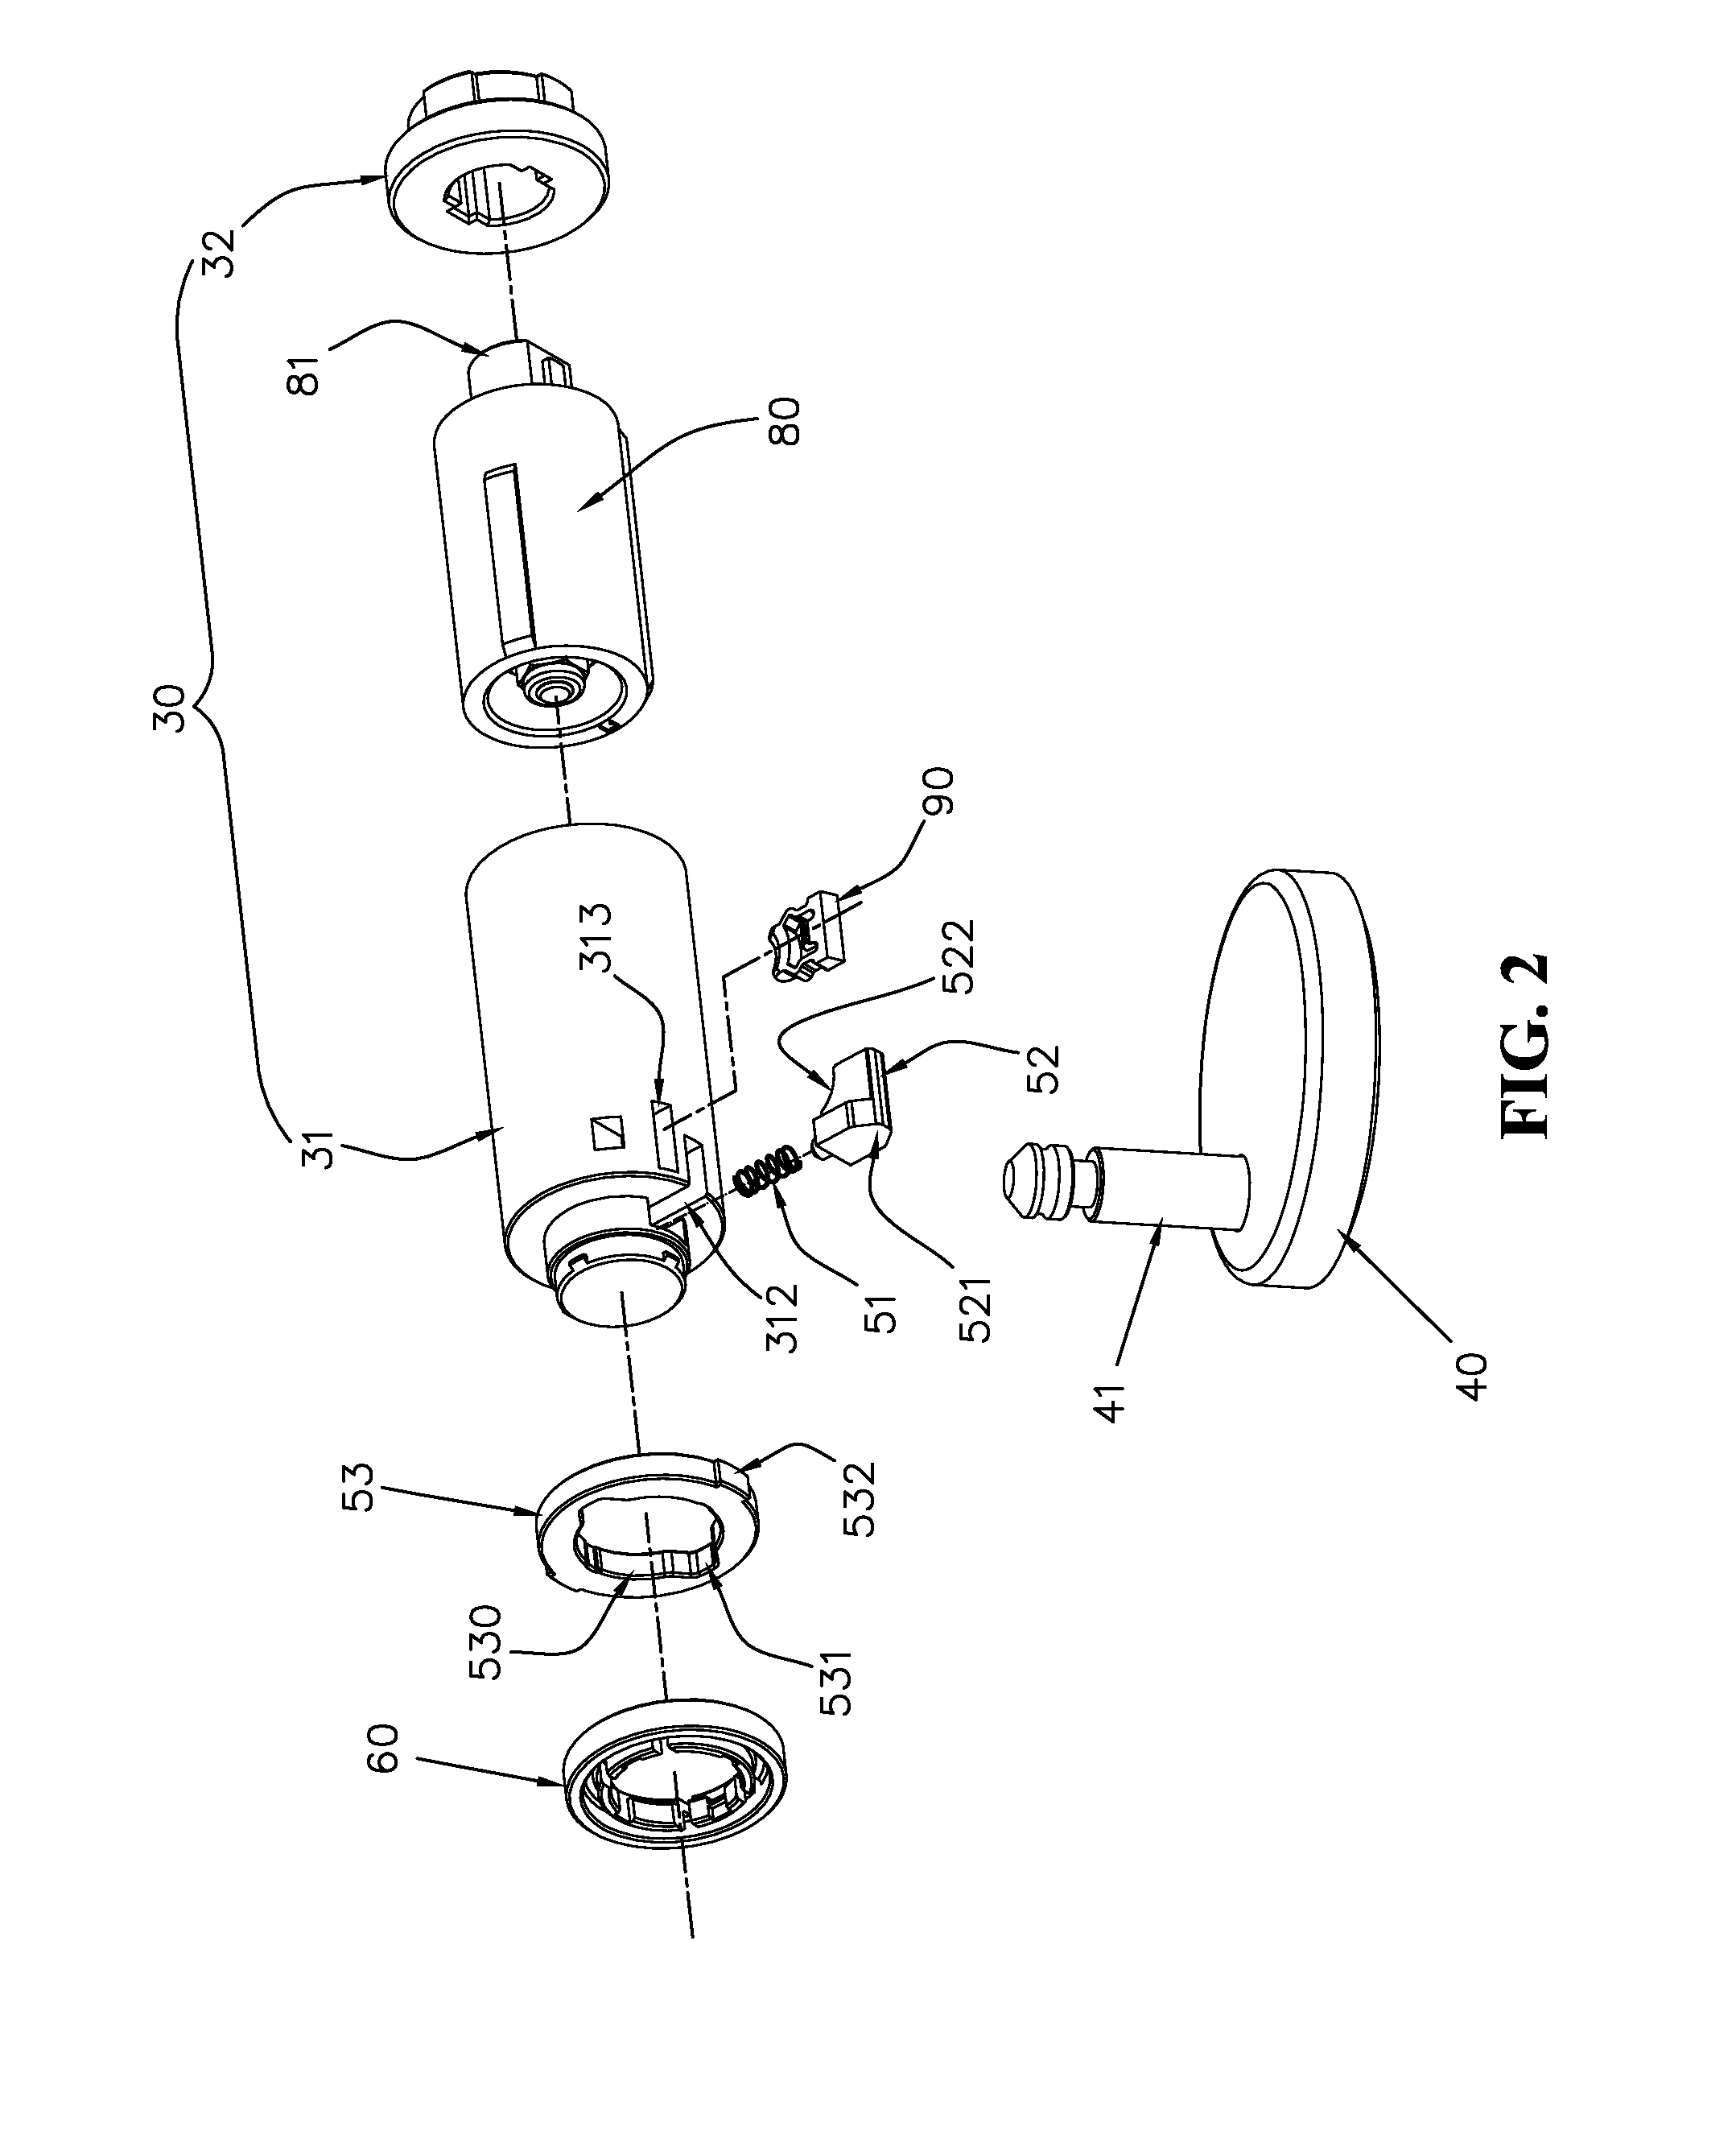 Vertical assembling and disassembling mechanism for toilet seat